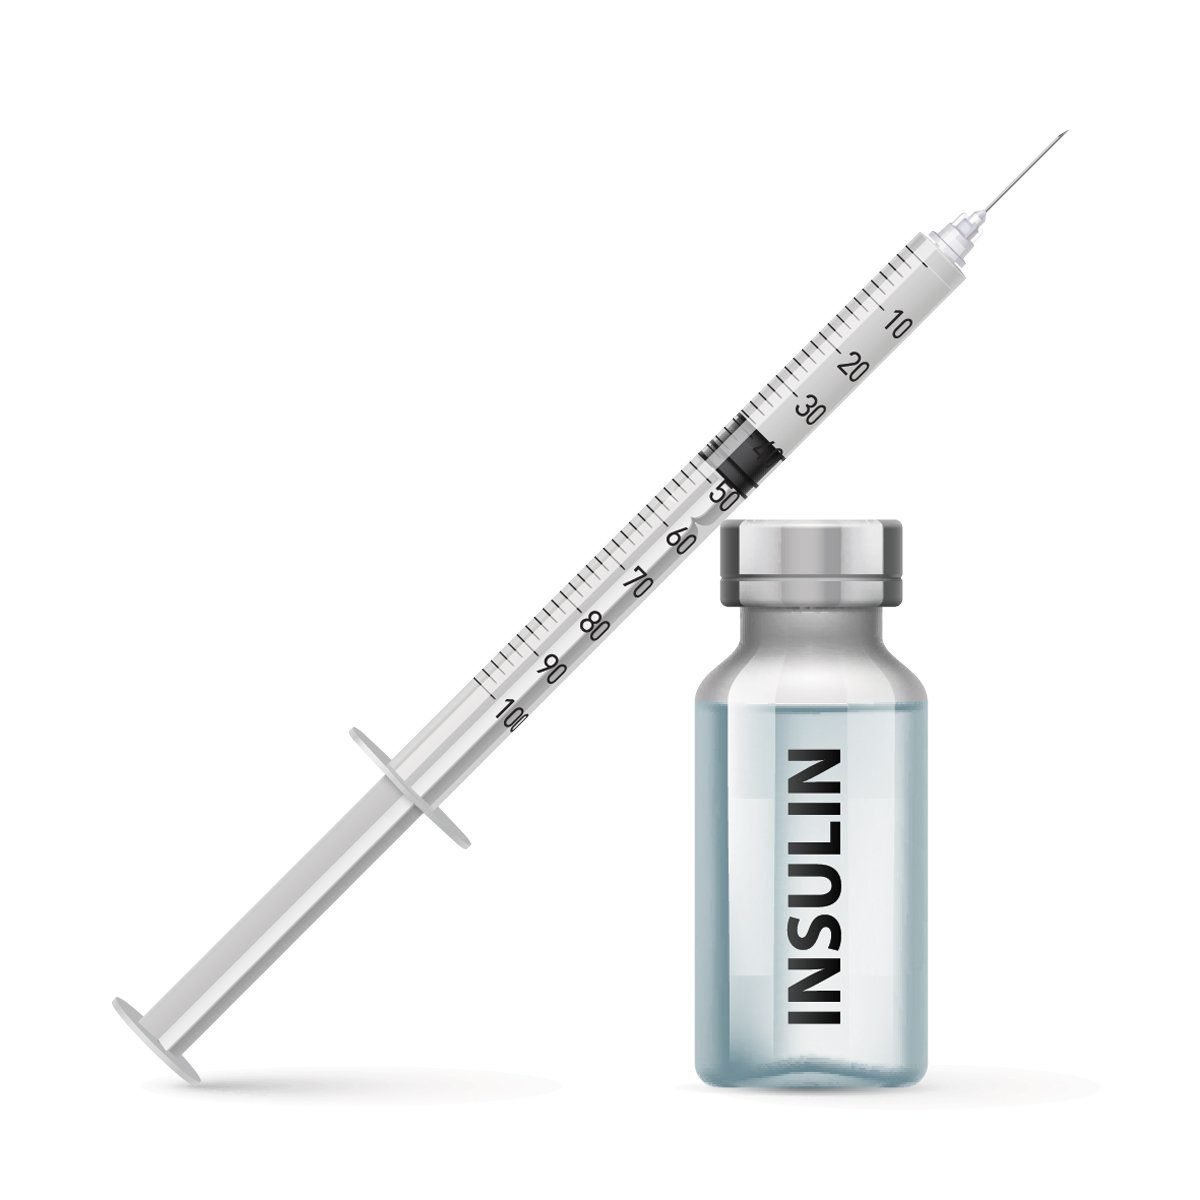 Insulin Resistance: A Growing Epidemic